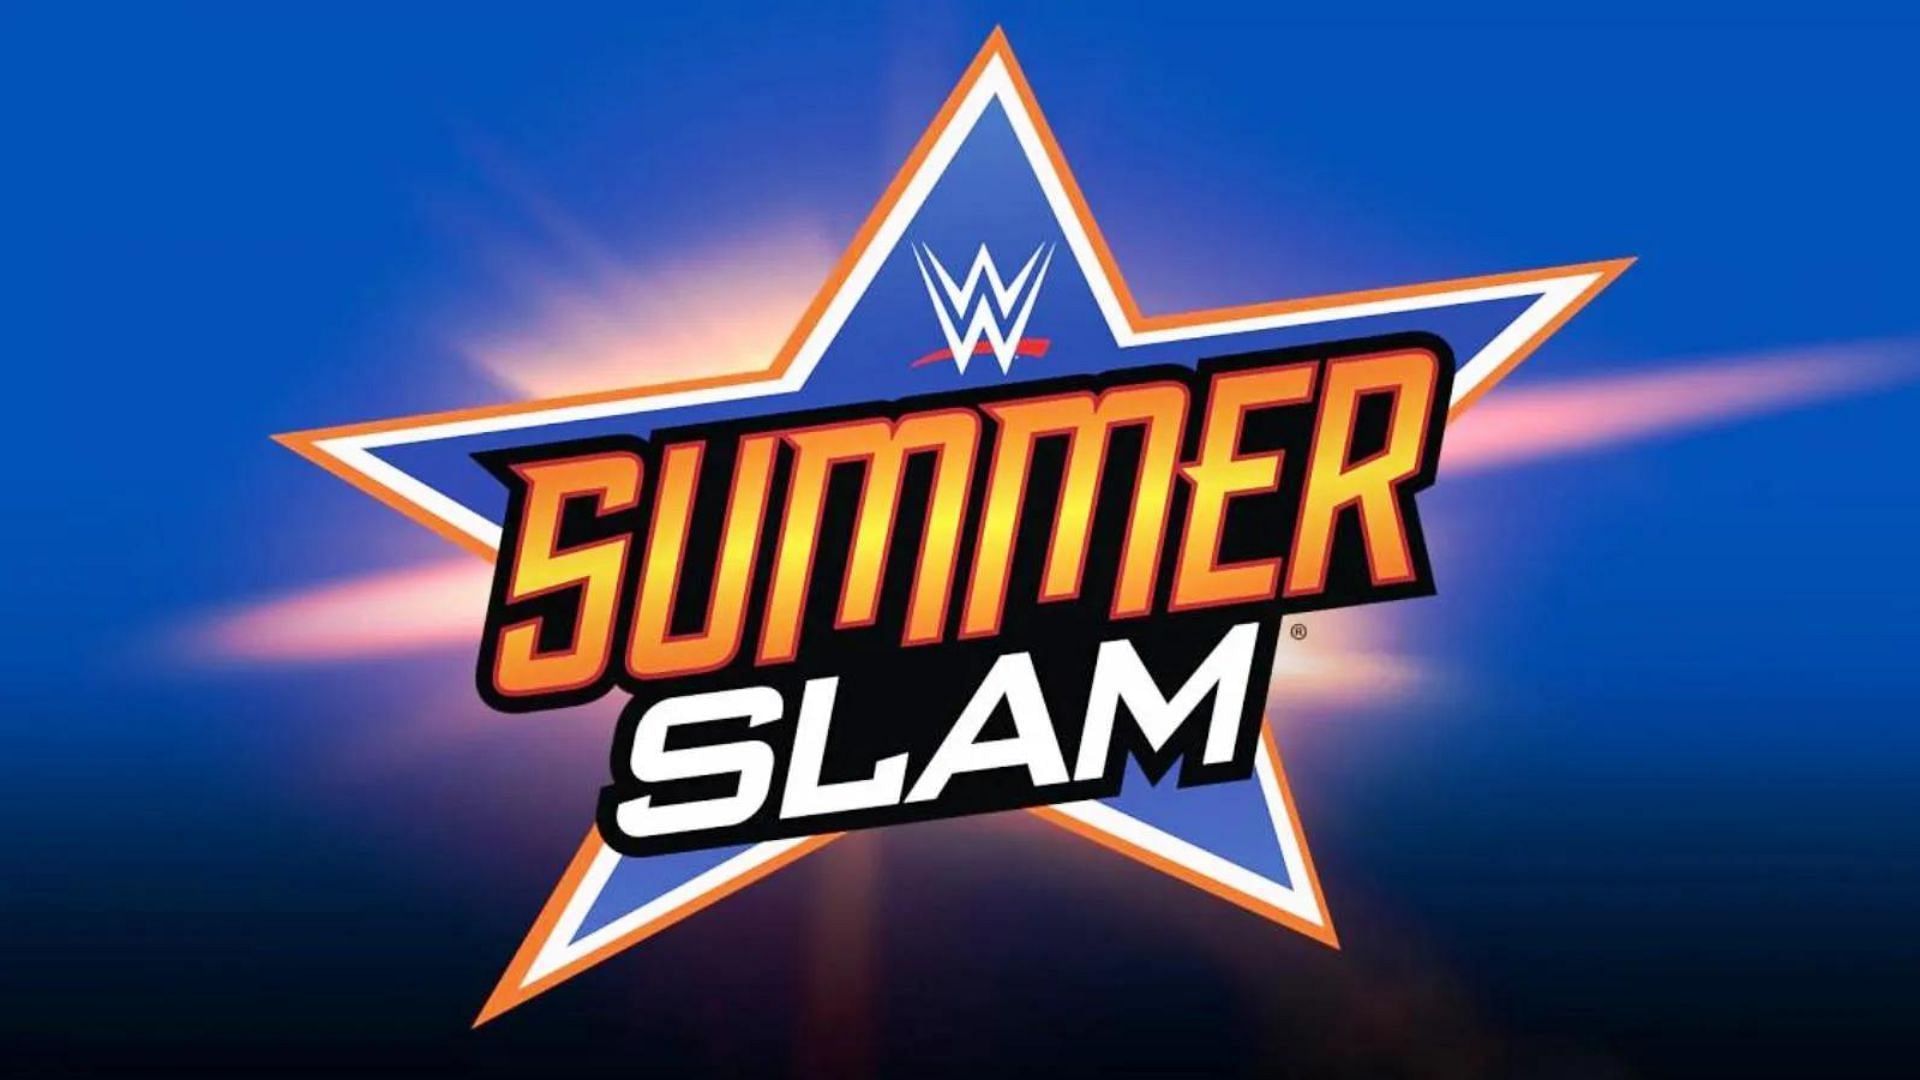 WWE SummerSlam is one of the biggest live events